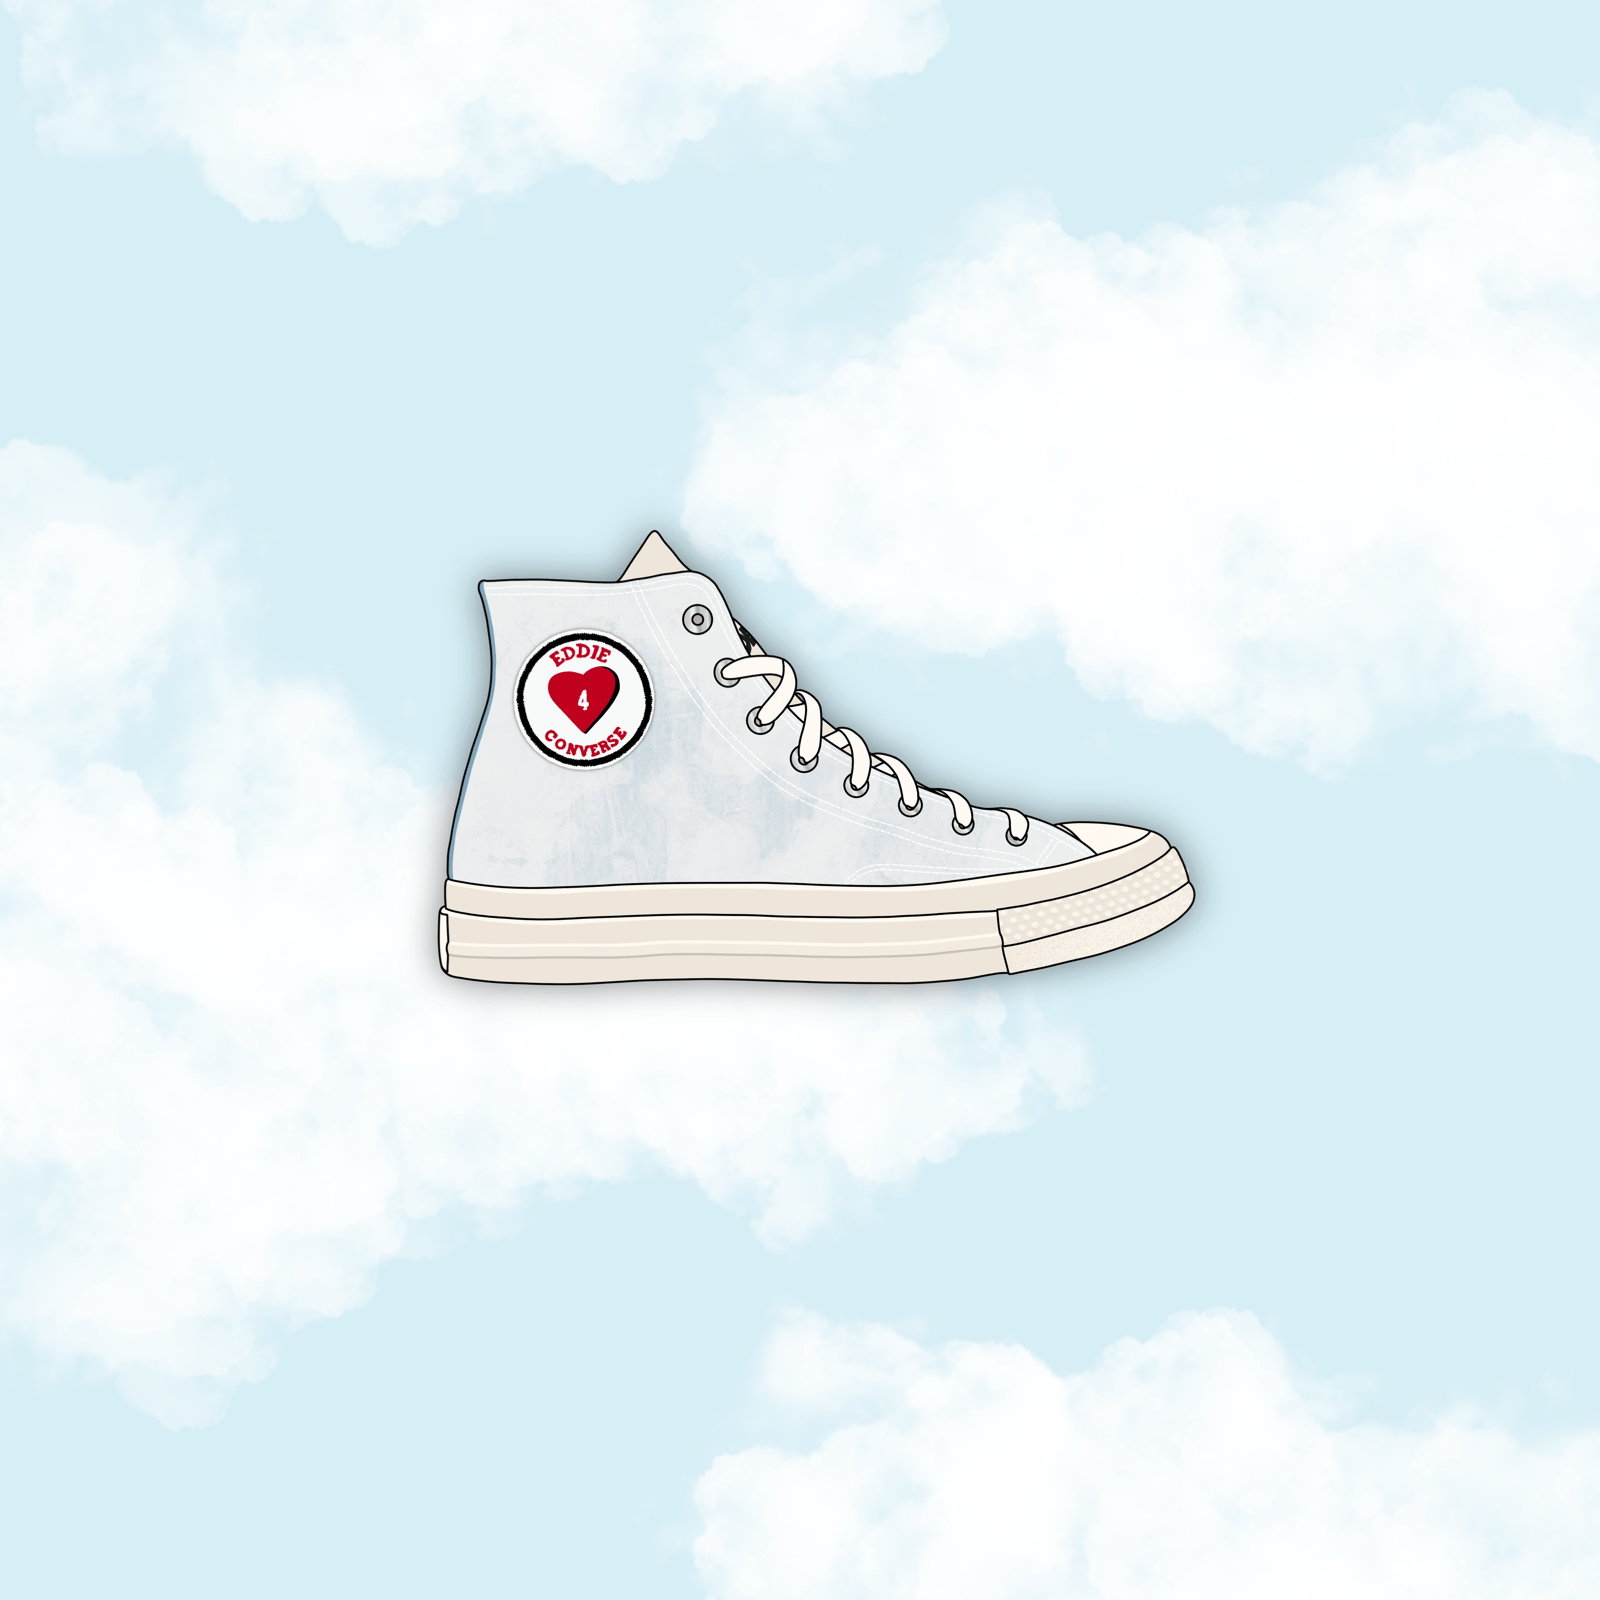 A pair of white converse sneakers floating in a blue sky with clouds - Converse